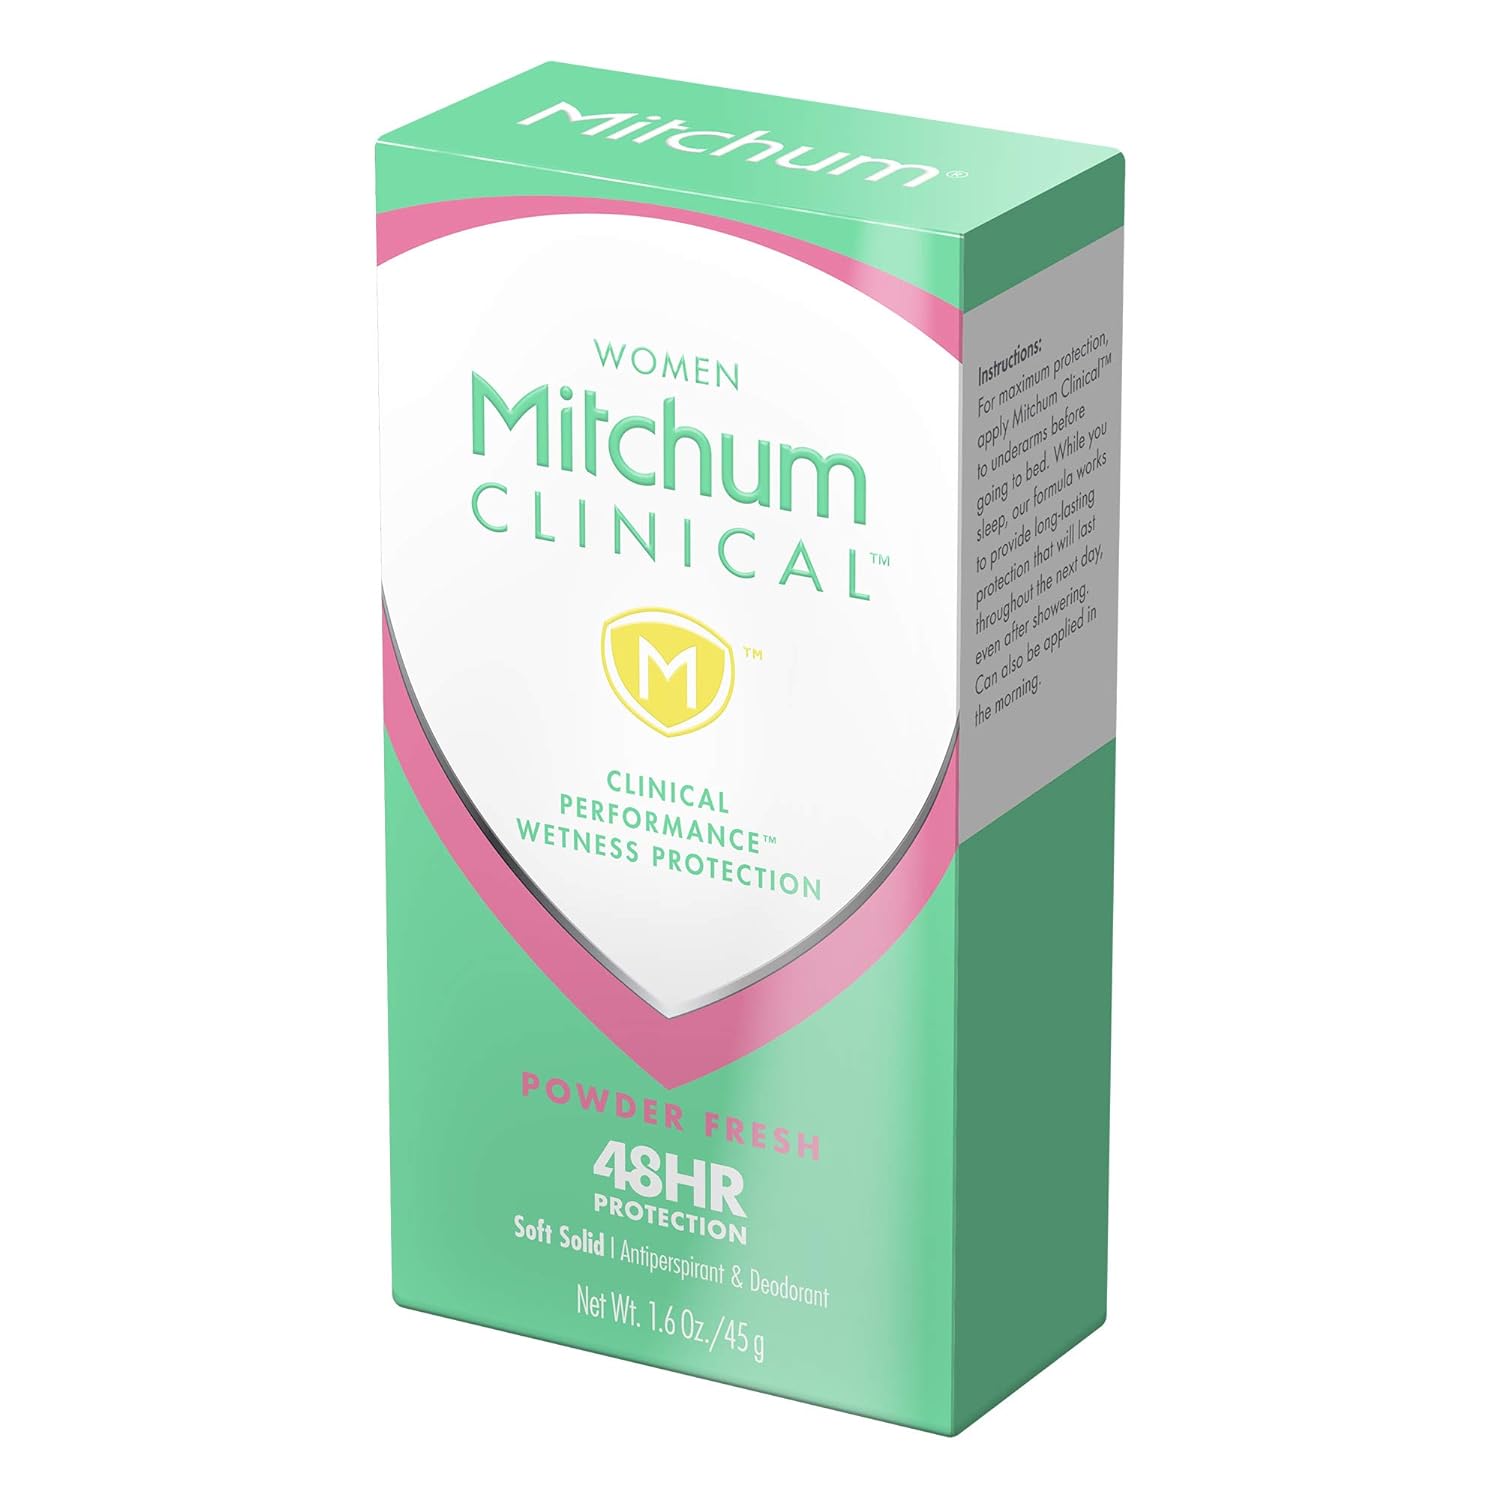 Mitchum Women's Deodorant, Clinical, Soft, Solid Antiperspirant Deodorant, Powder Fresh, 1.6 Oz (Pack of 1),(Package may vary) : Beauty & Personal Care